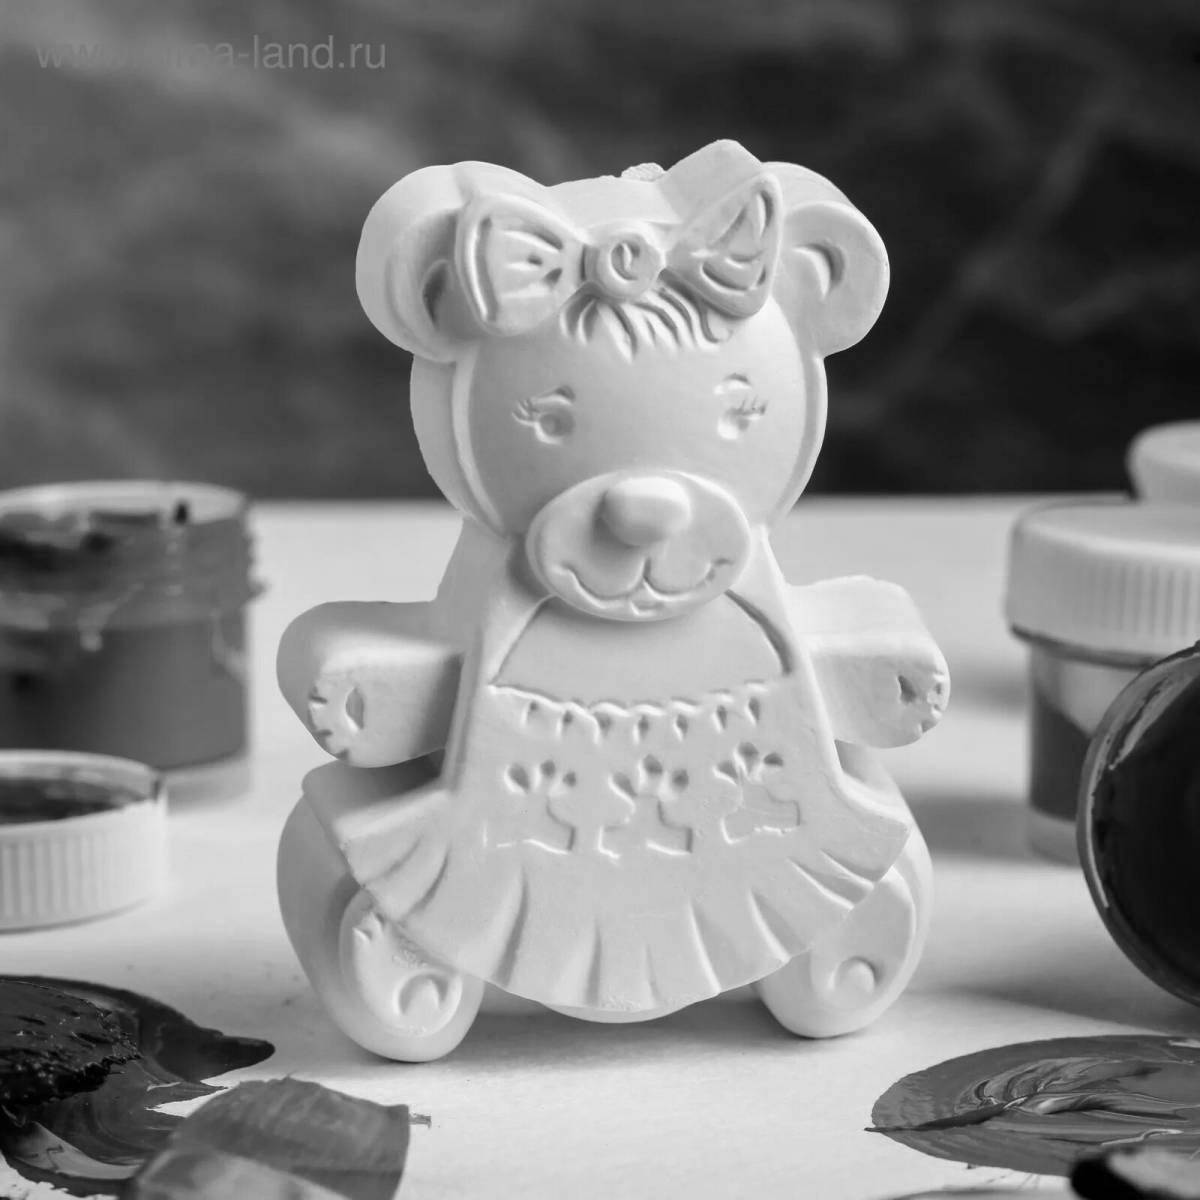 Coloring glossy plaster figurines